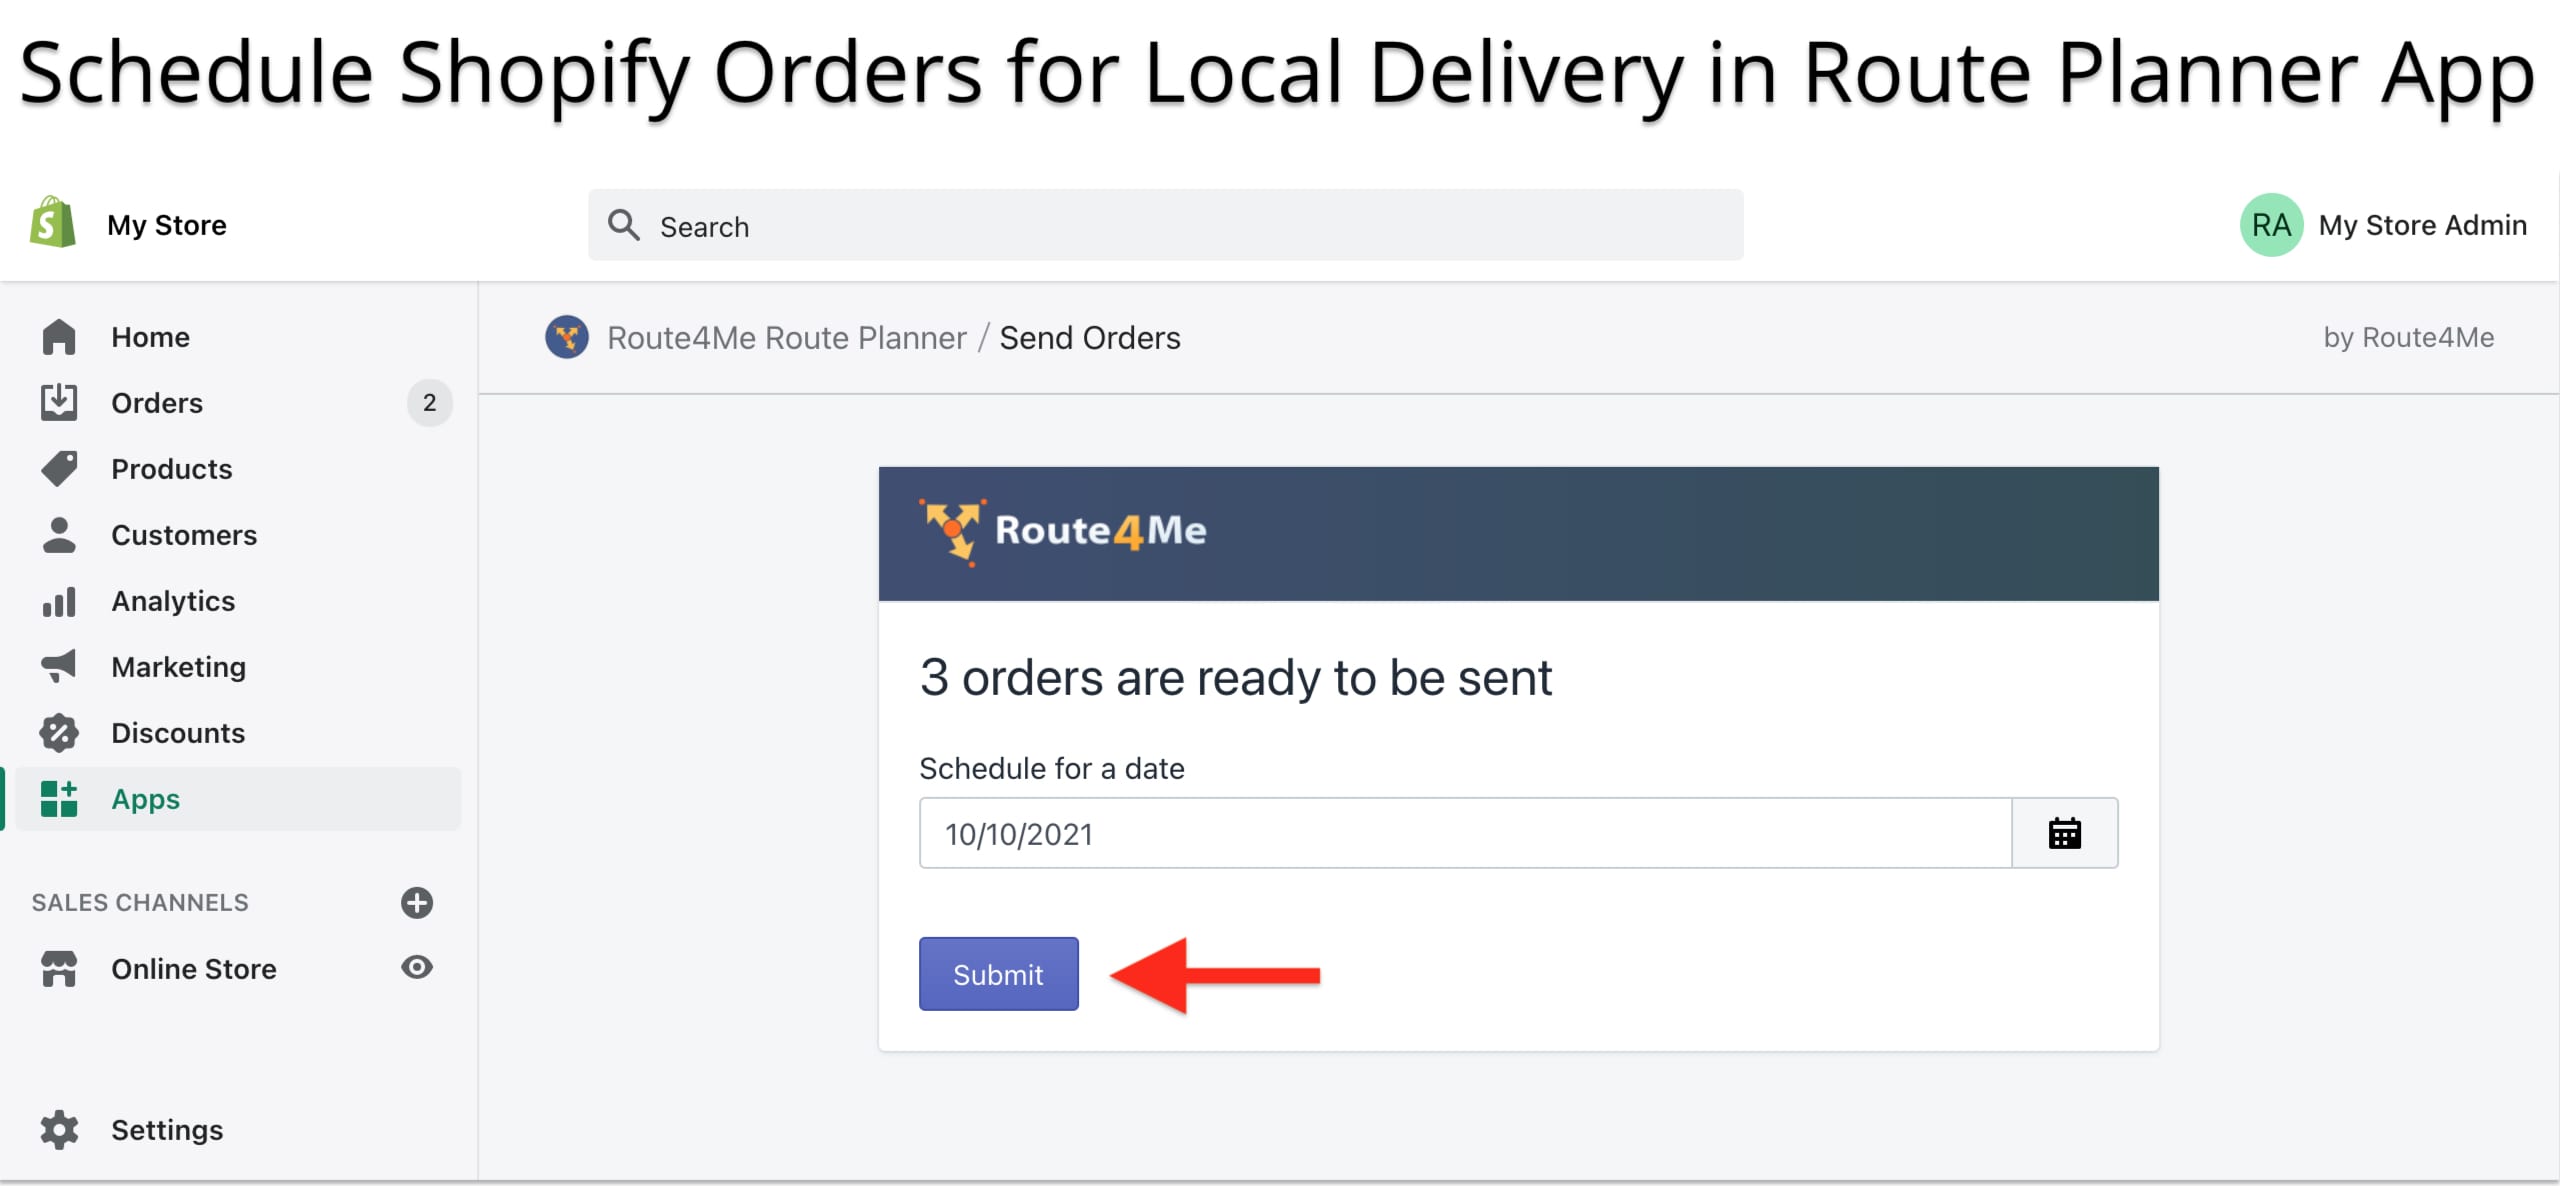 Schedule Shopify orders for delivery when sending online orders to the route planner app.